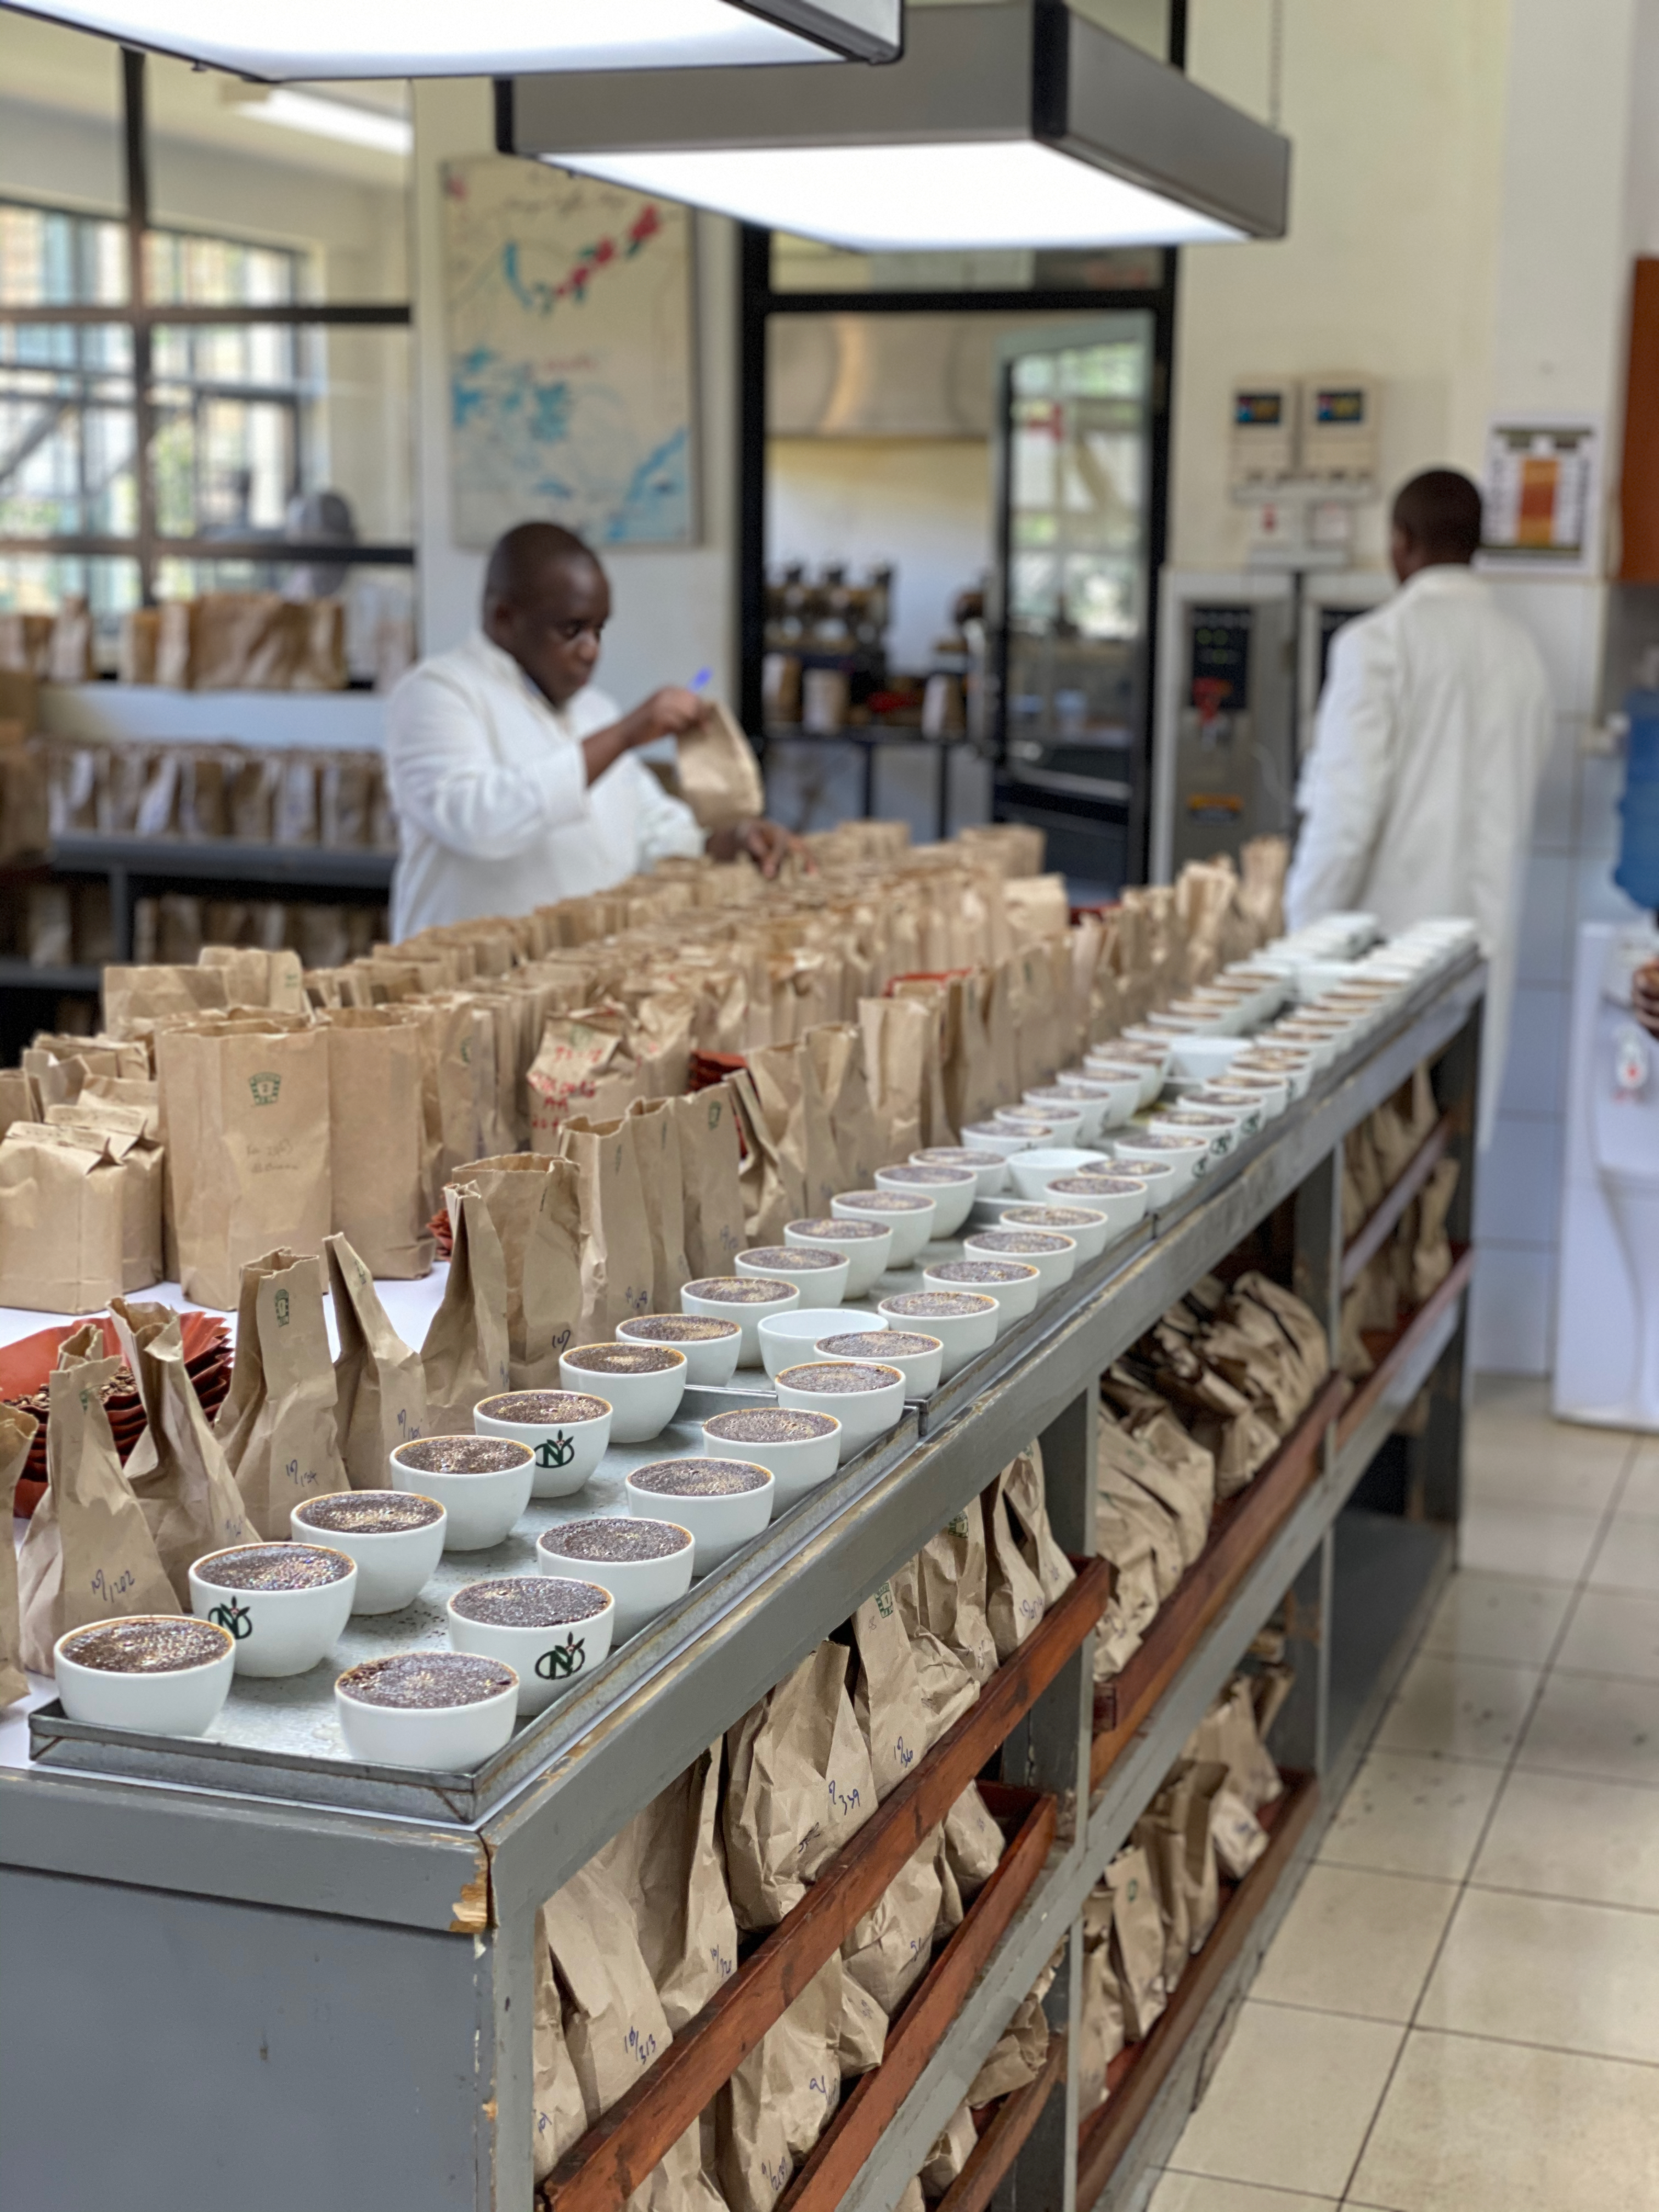 Lots of cupping at Tropical to find the best Kenya coffees